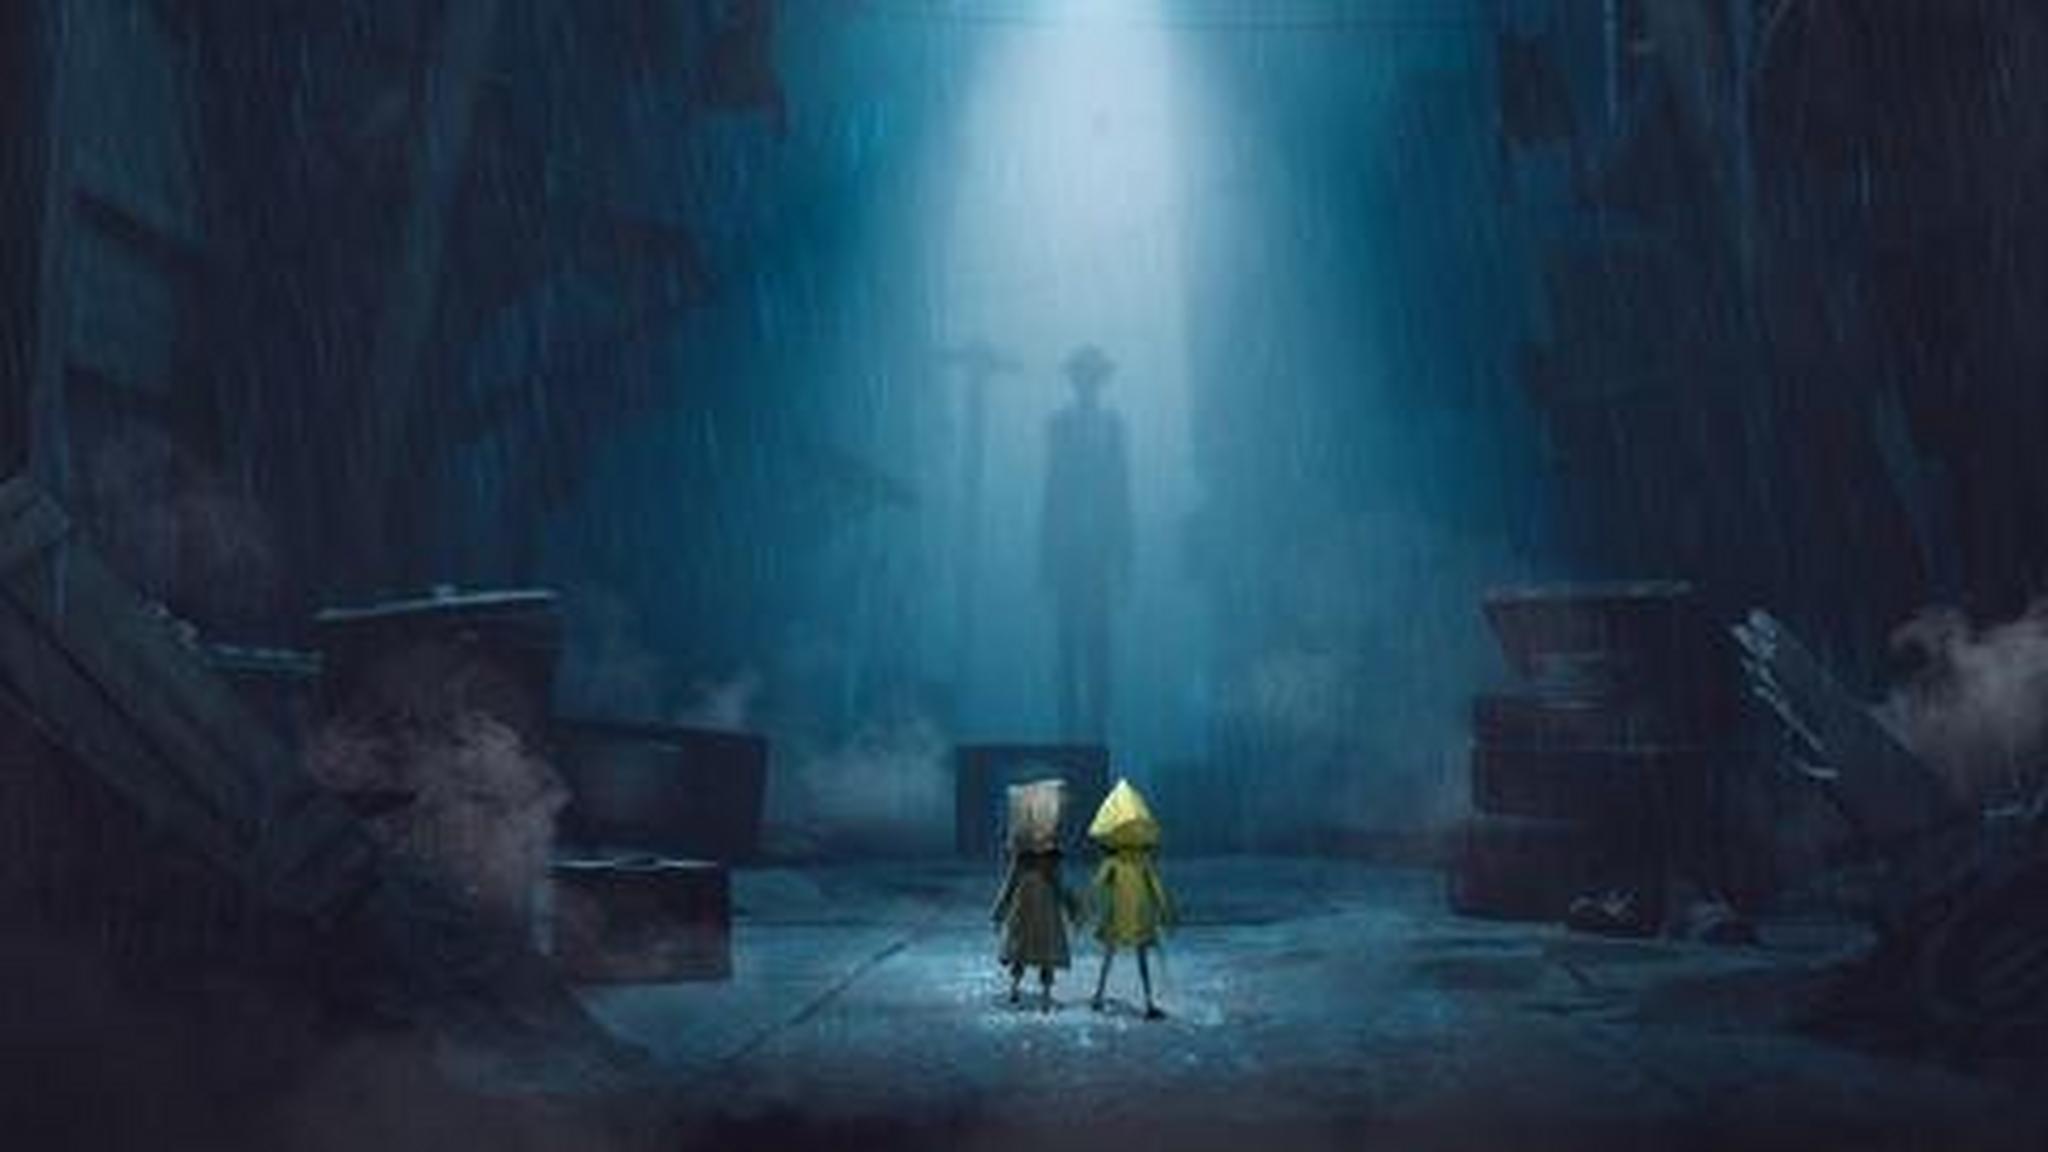 Little Nightmares 1 & 2 - PlayStation 4 Game